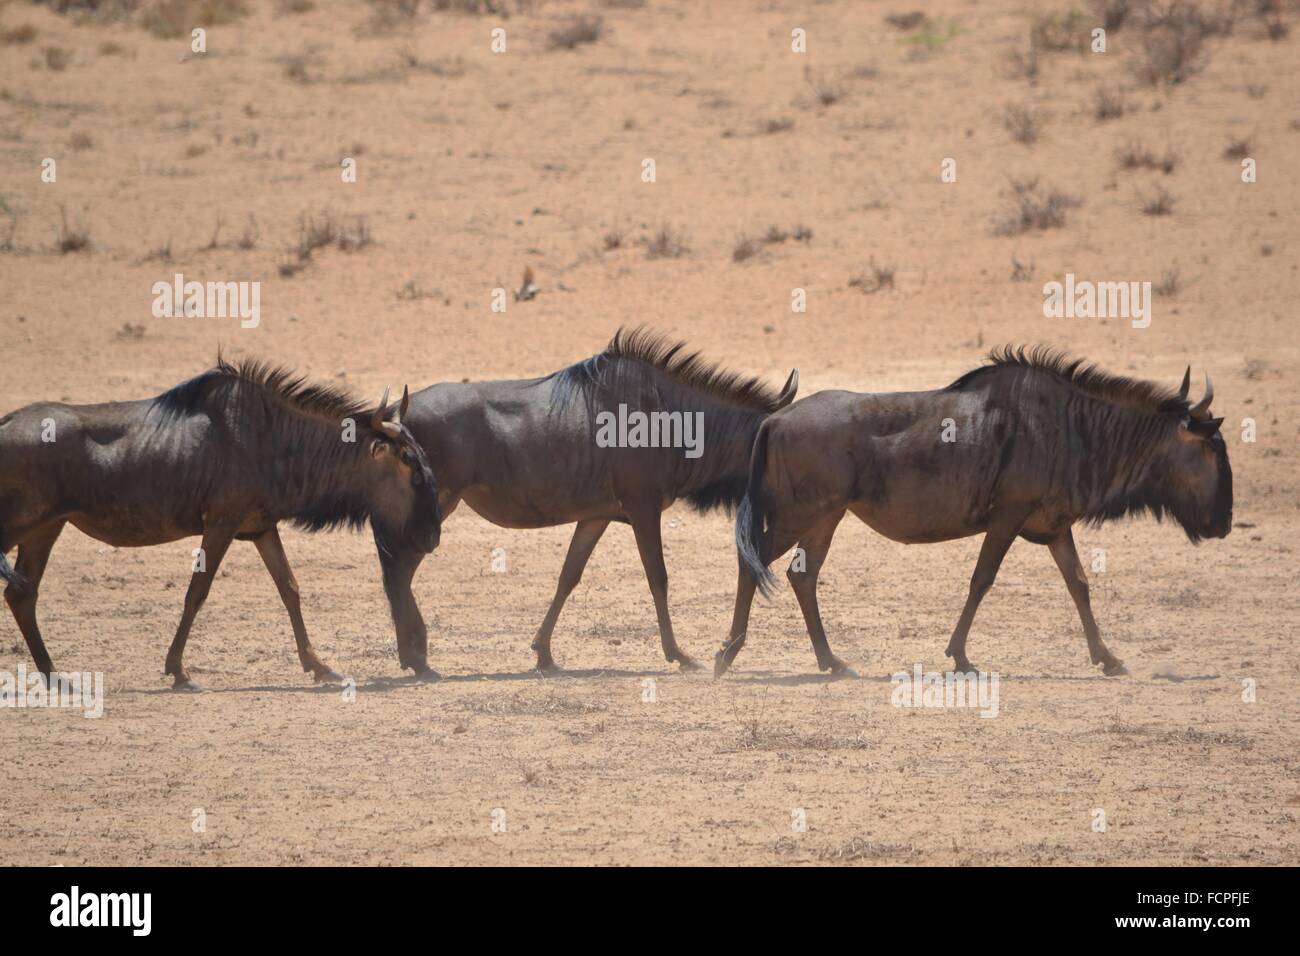 Three wildebeest in the Kgalagadi Transfrontier Park, South Africa Stock Photo